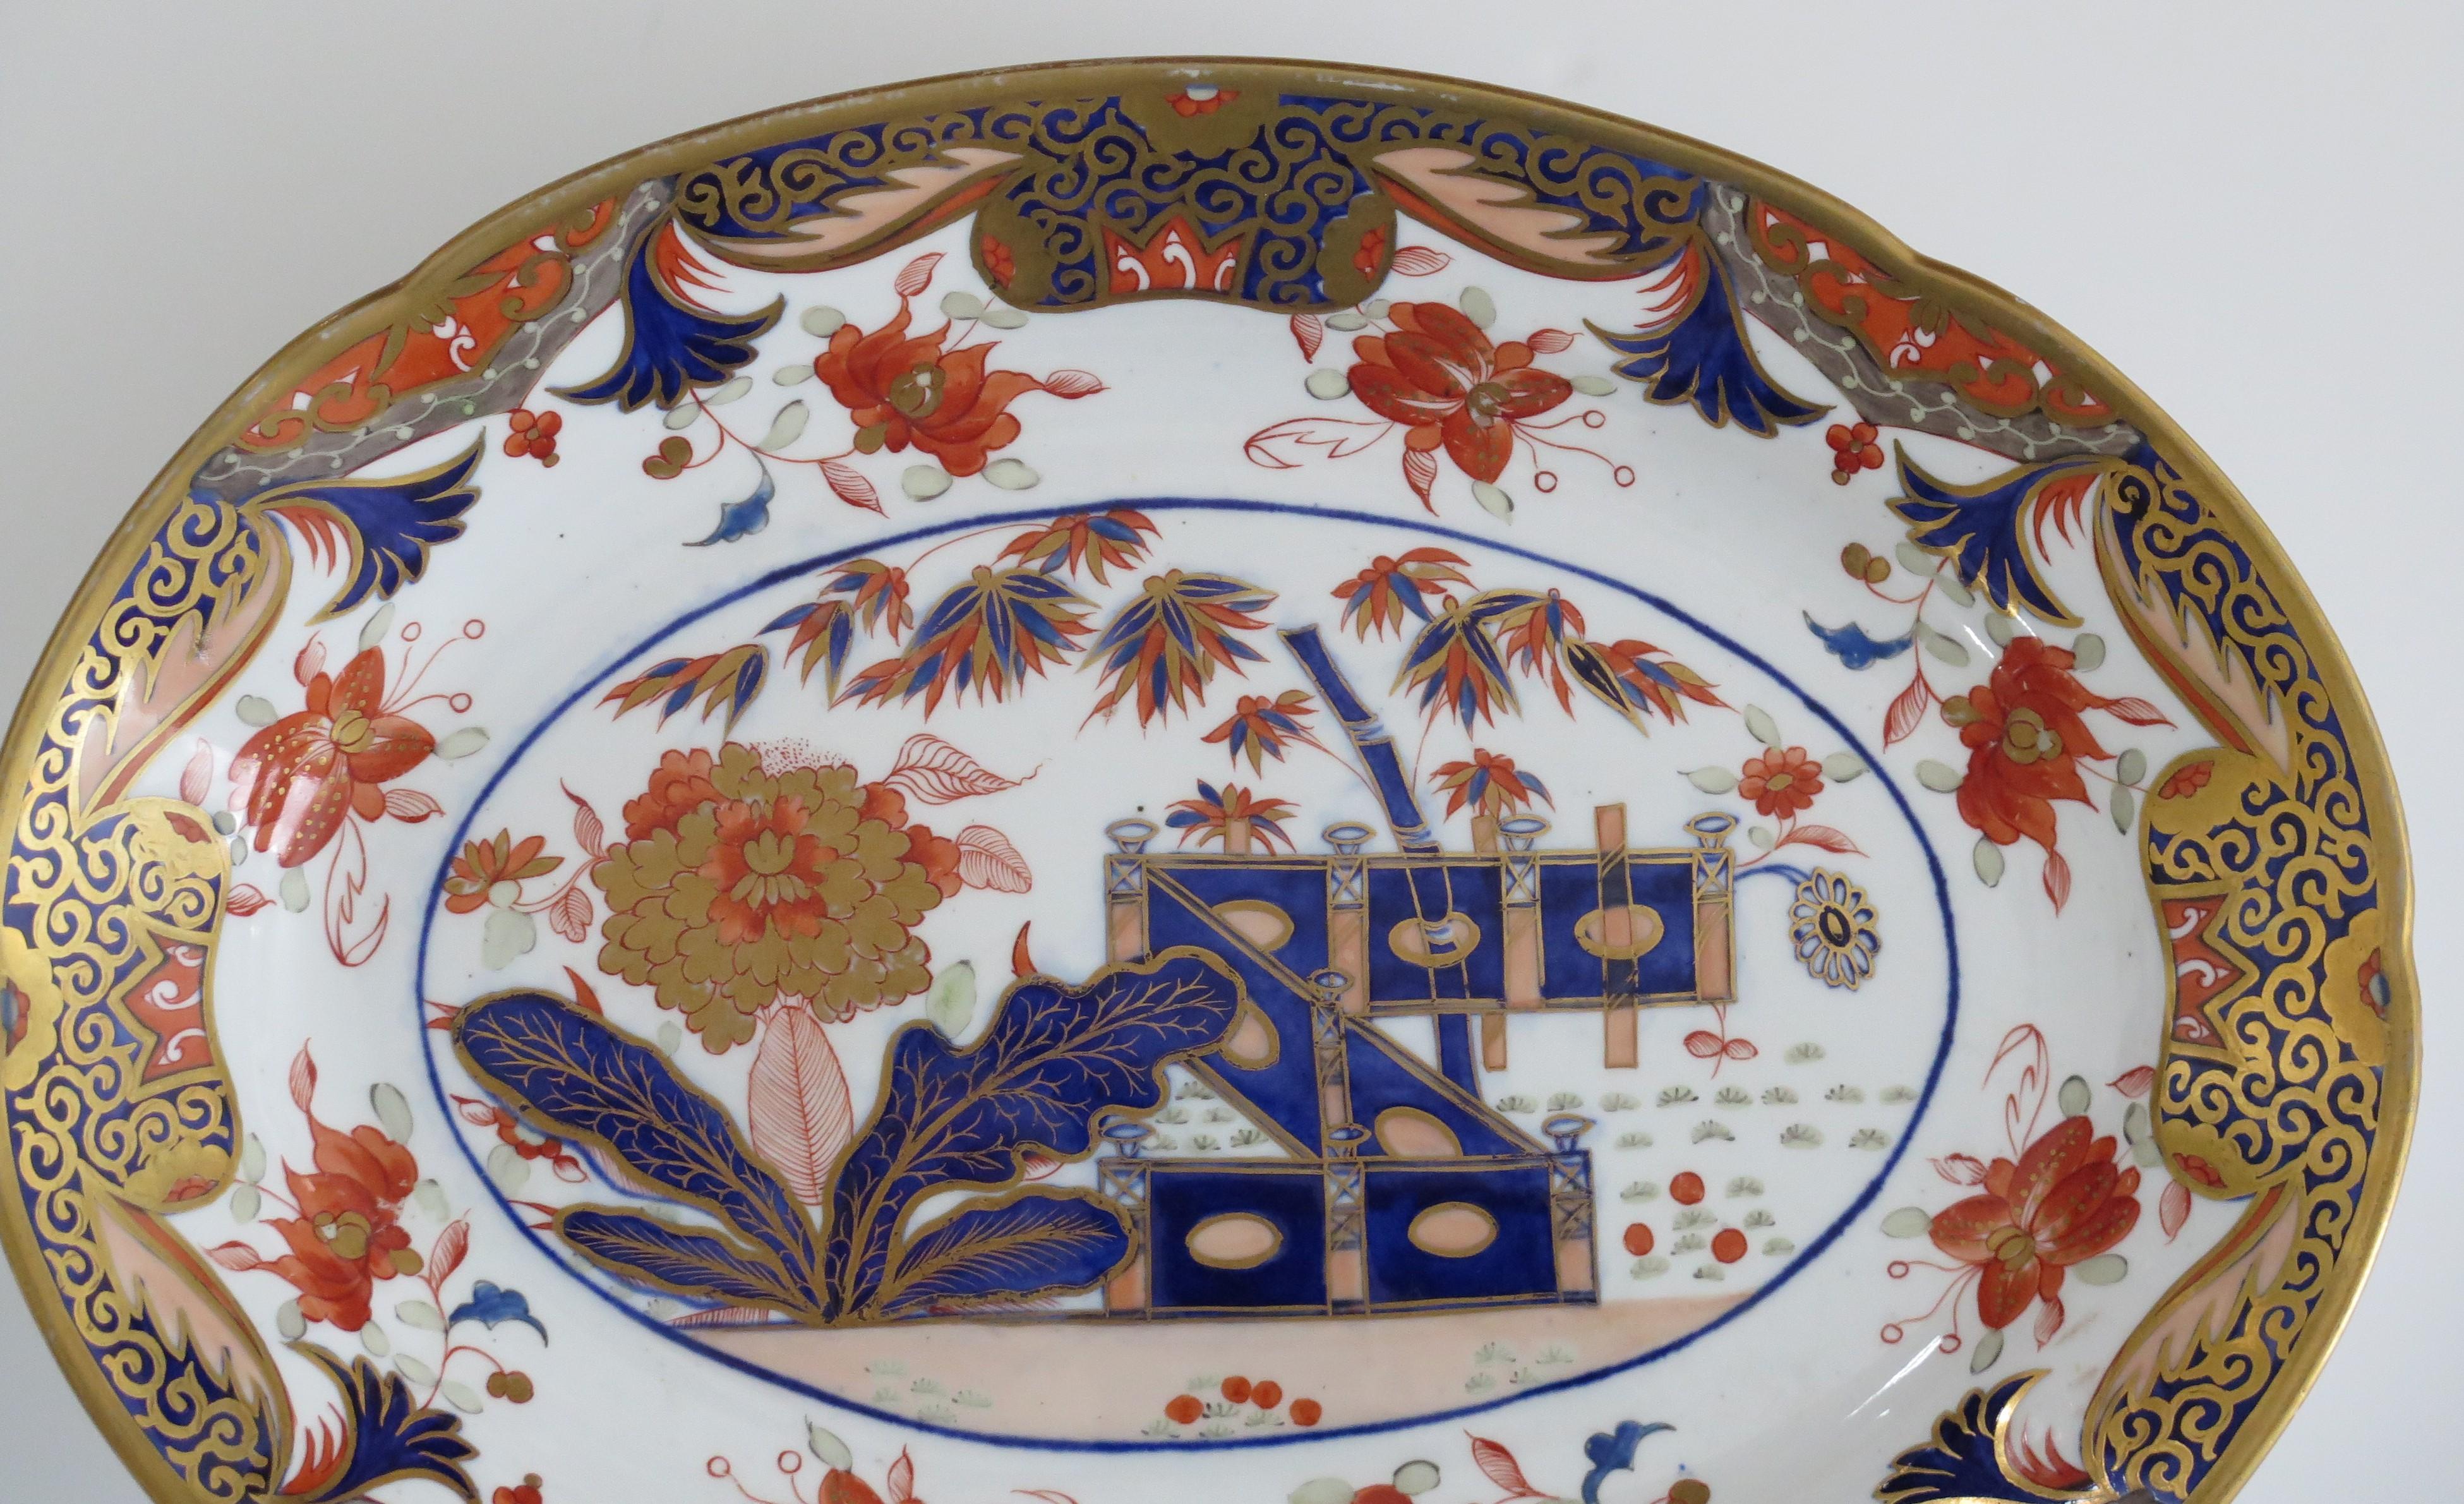 English Spode Porcelain Serving Platter or Dish Hand Painted & Gilded Ptn 967 circa 1810 For Sale